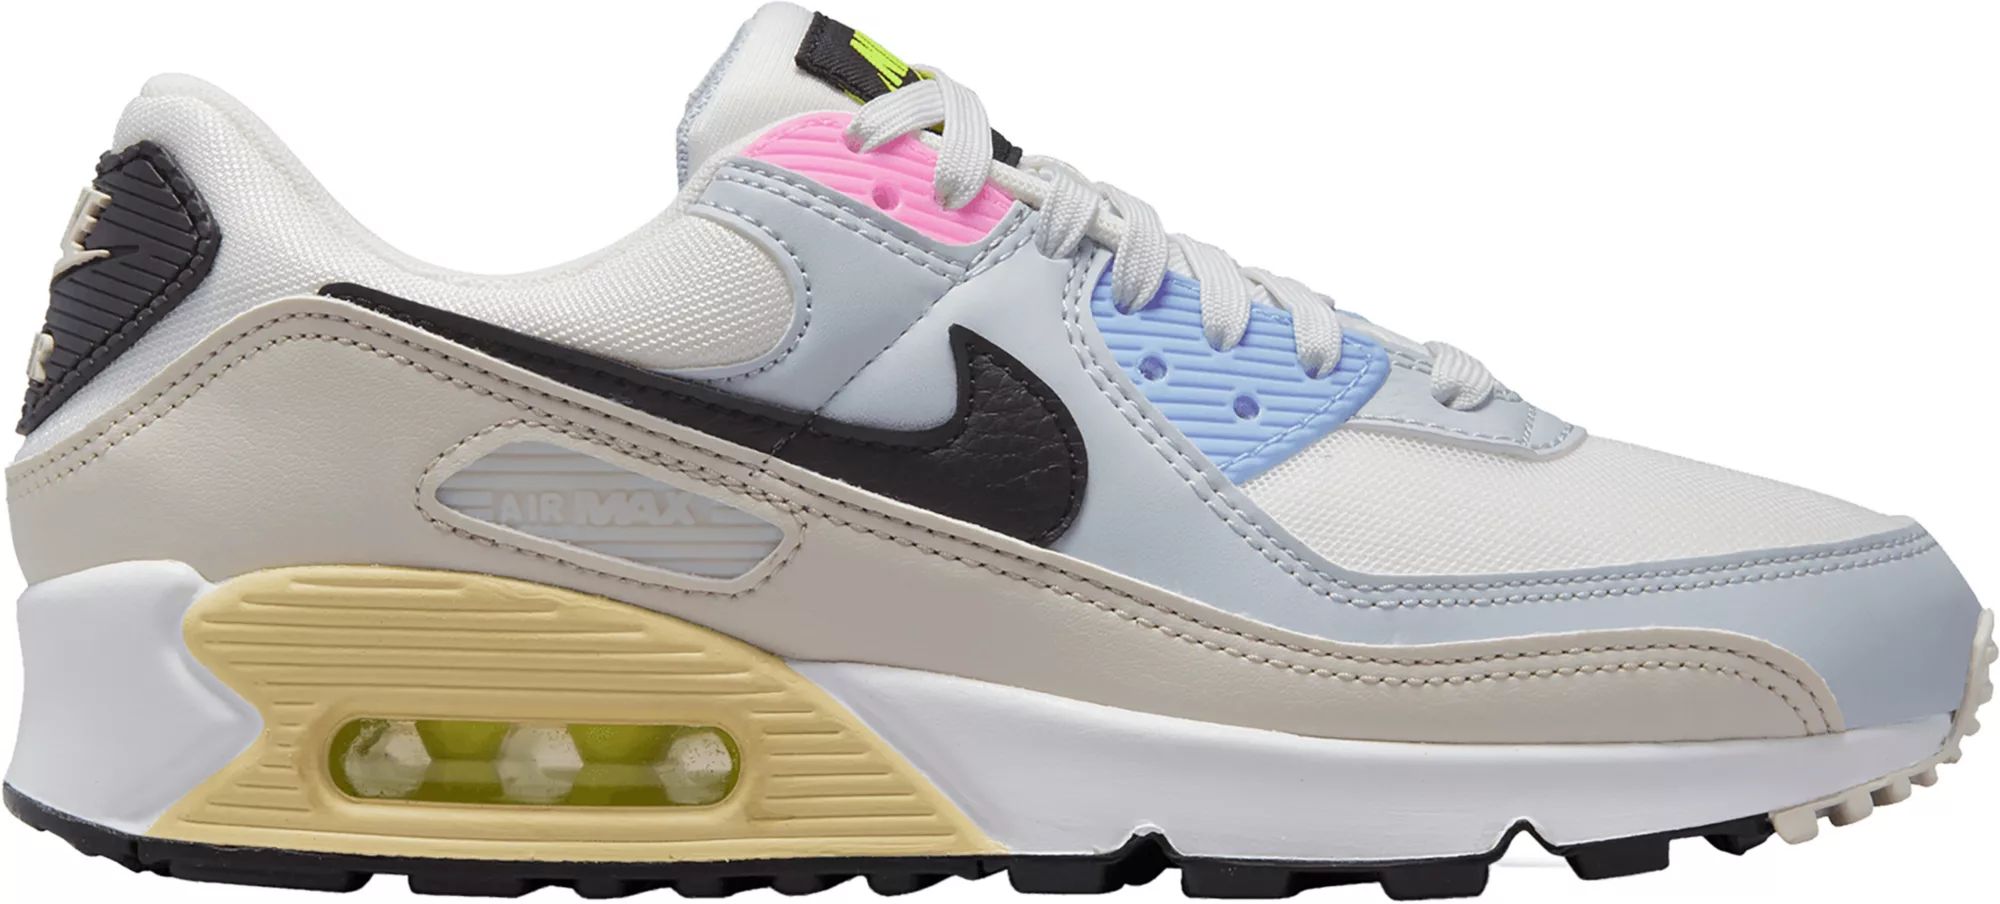 Nike Women's Air Max 90 Shoes, Size 10, Summit White/Lt Bone/Blk | Back to School | Dick's Sporting Goods